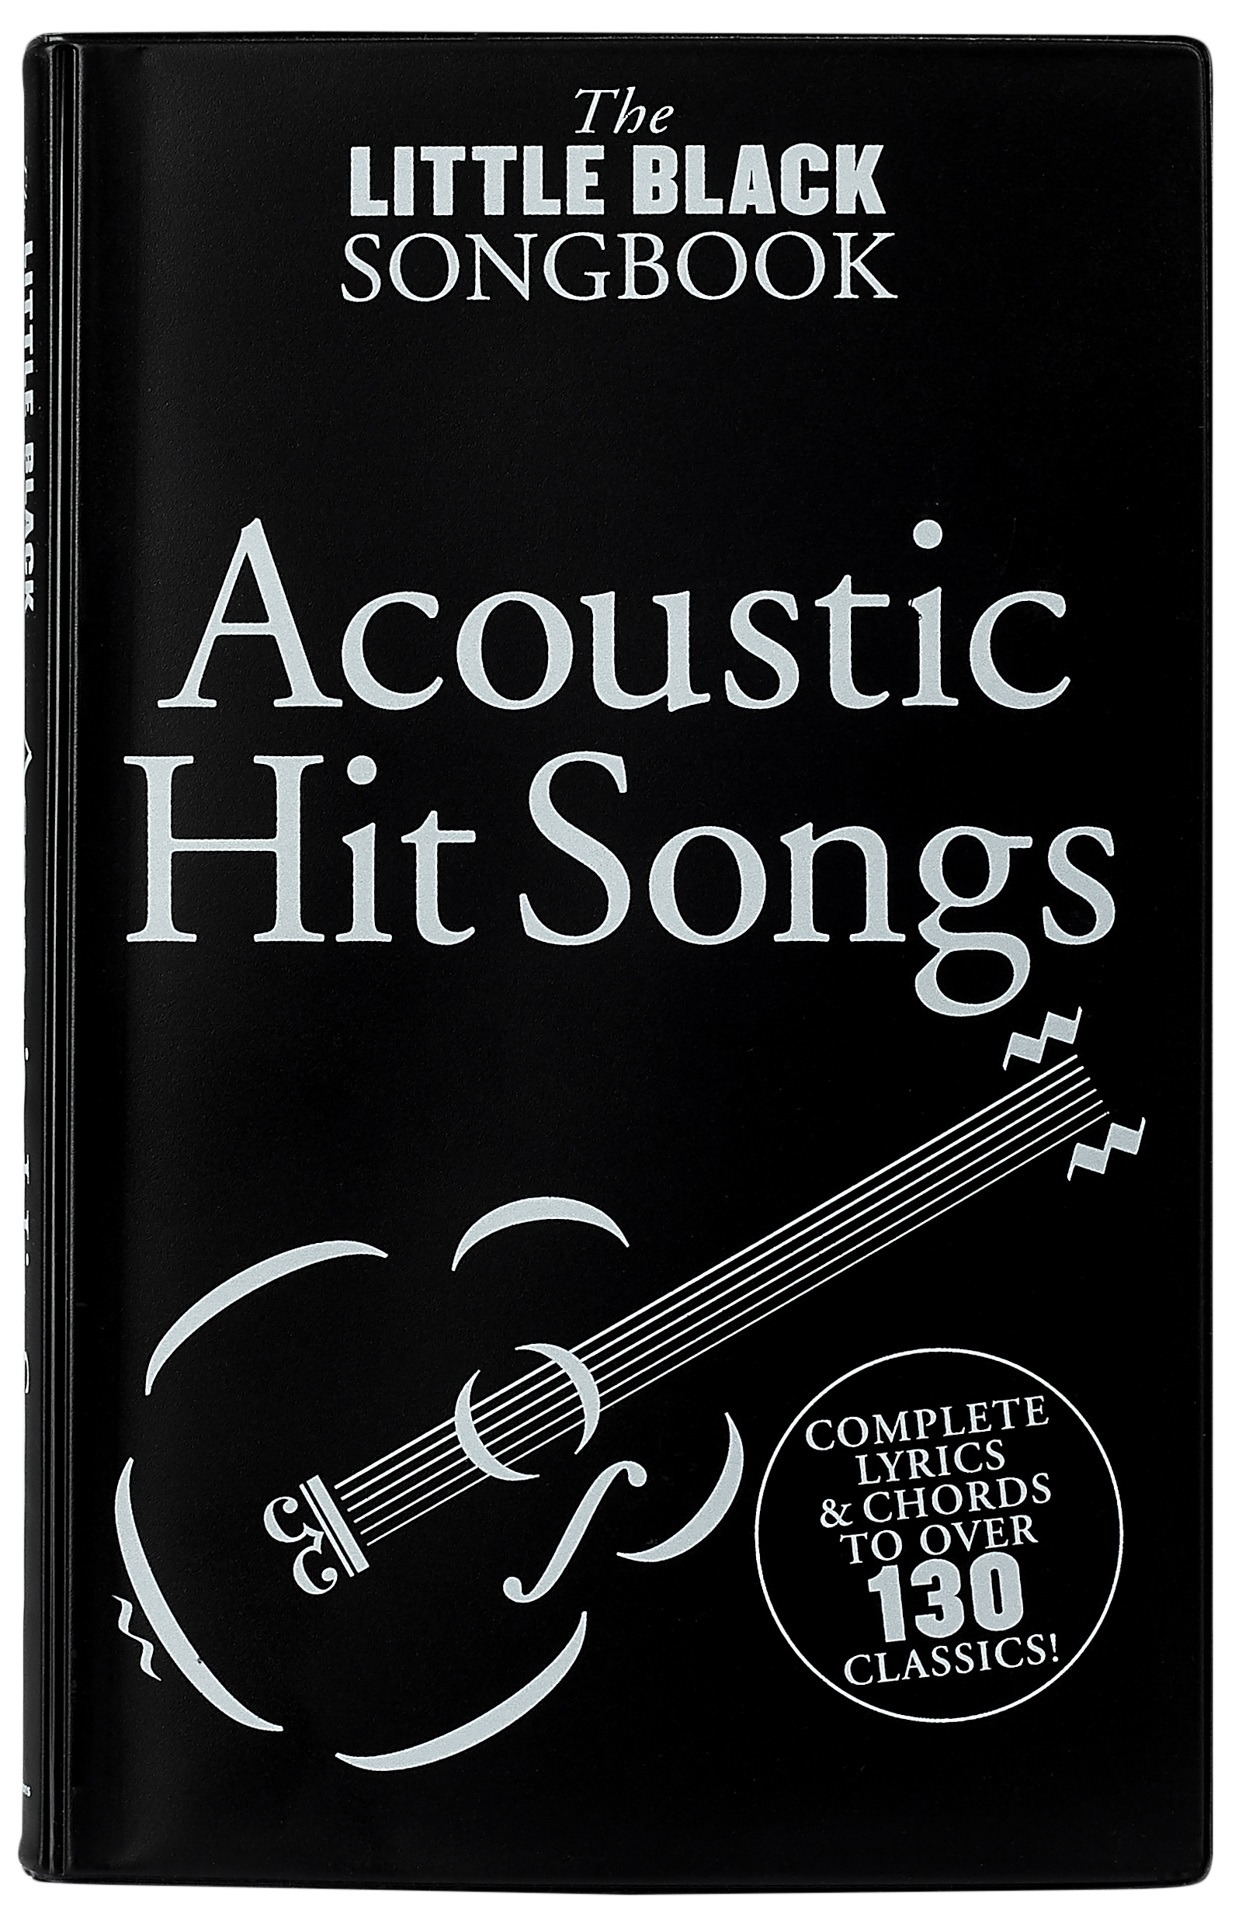 MS The Little Black Songbook: Acoustic Hits